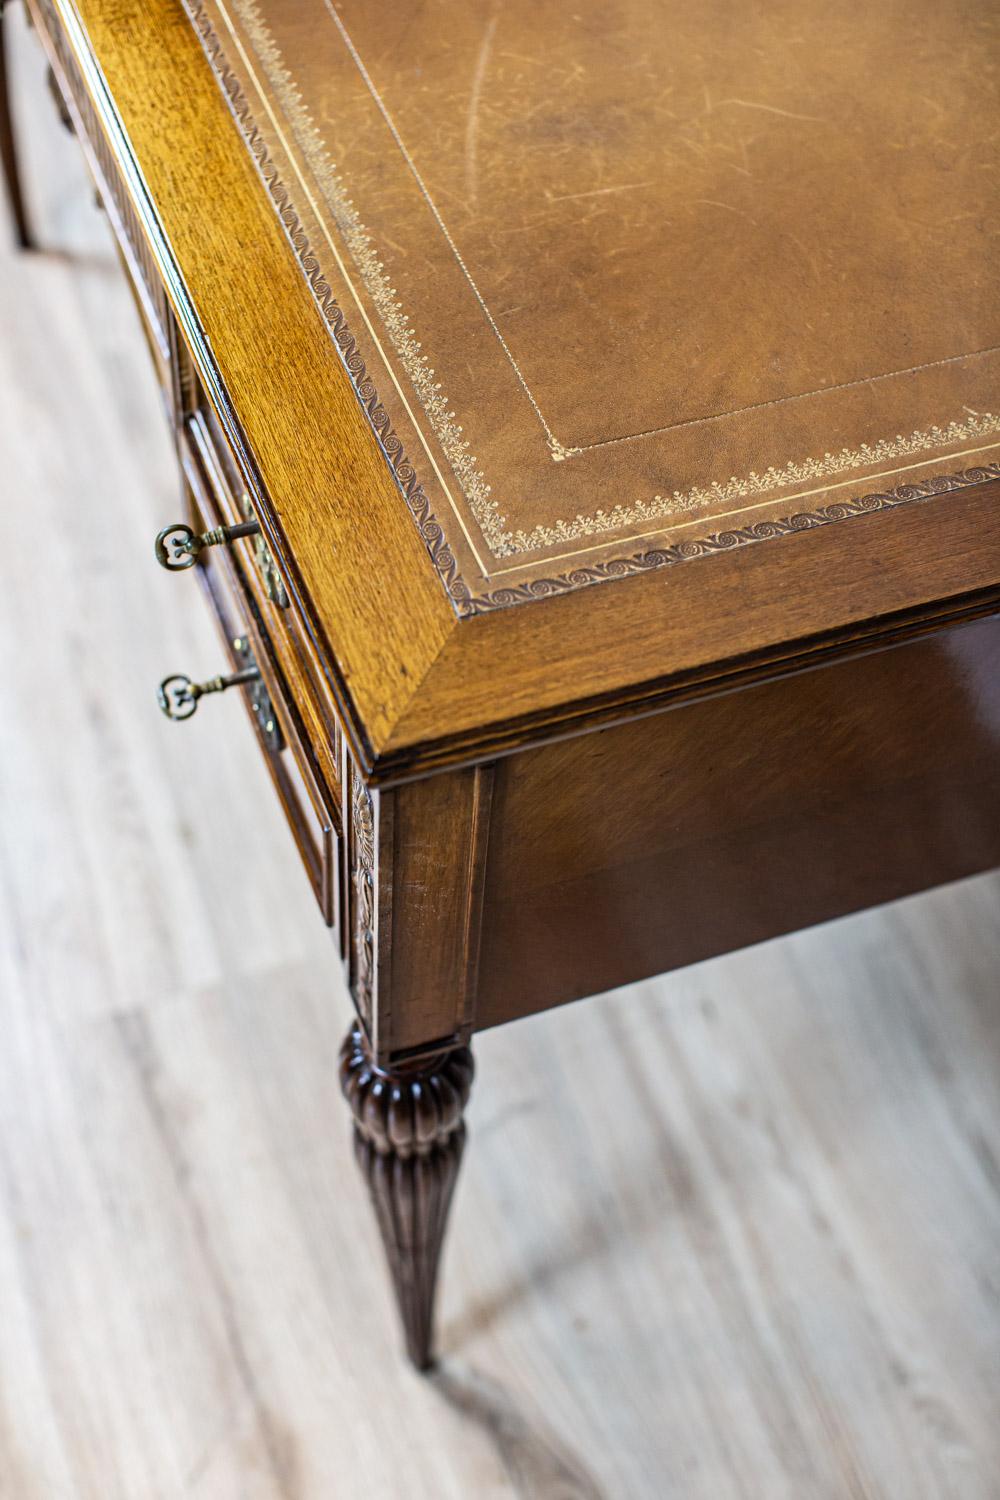 Lady's Mahogany Desk from the Late 19th Century in Brass Details 2